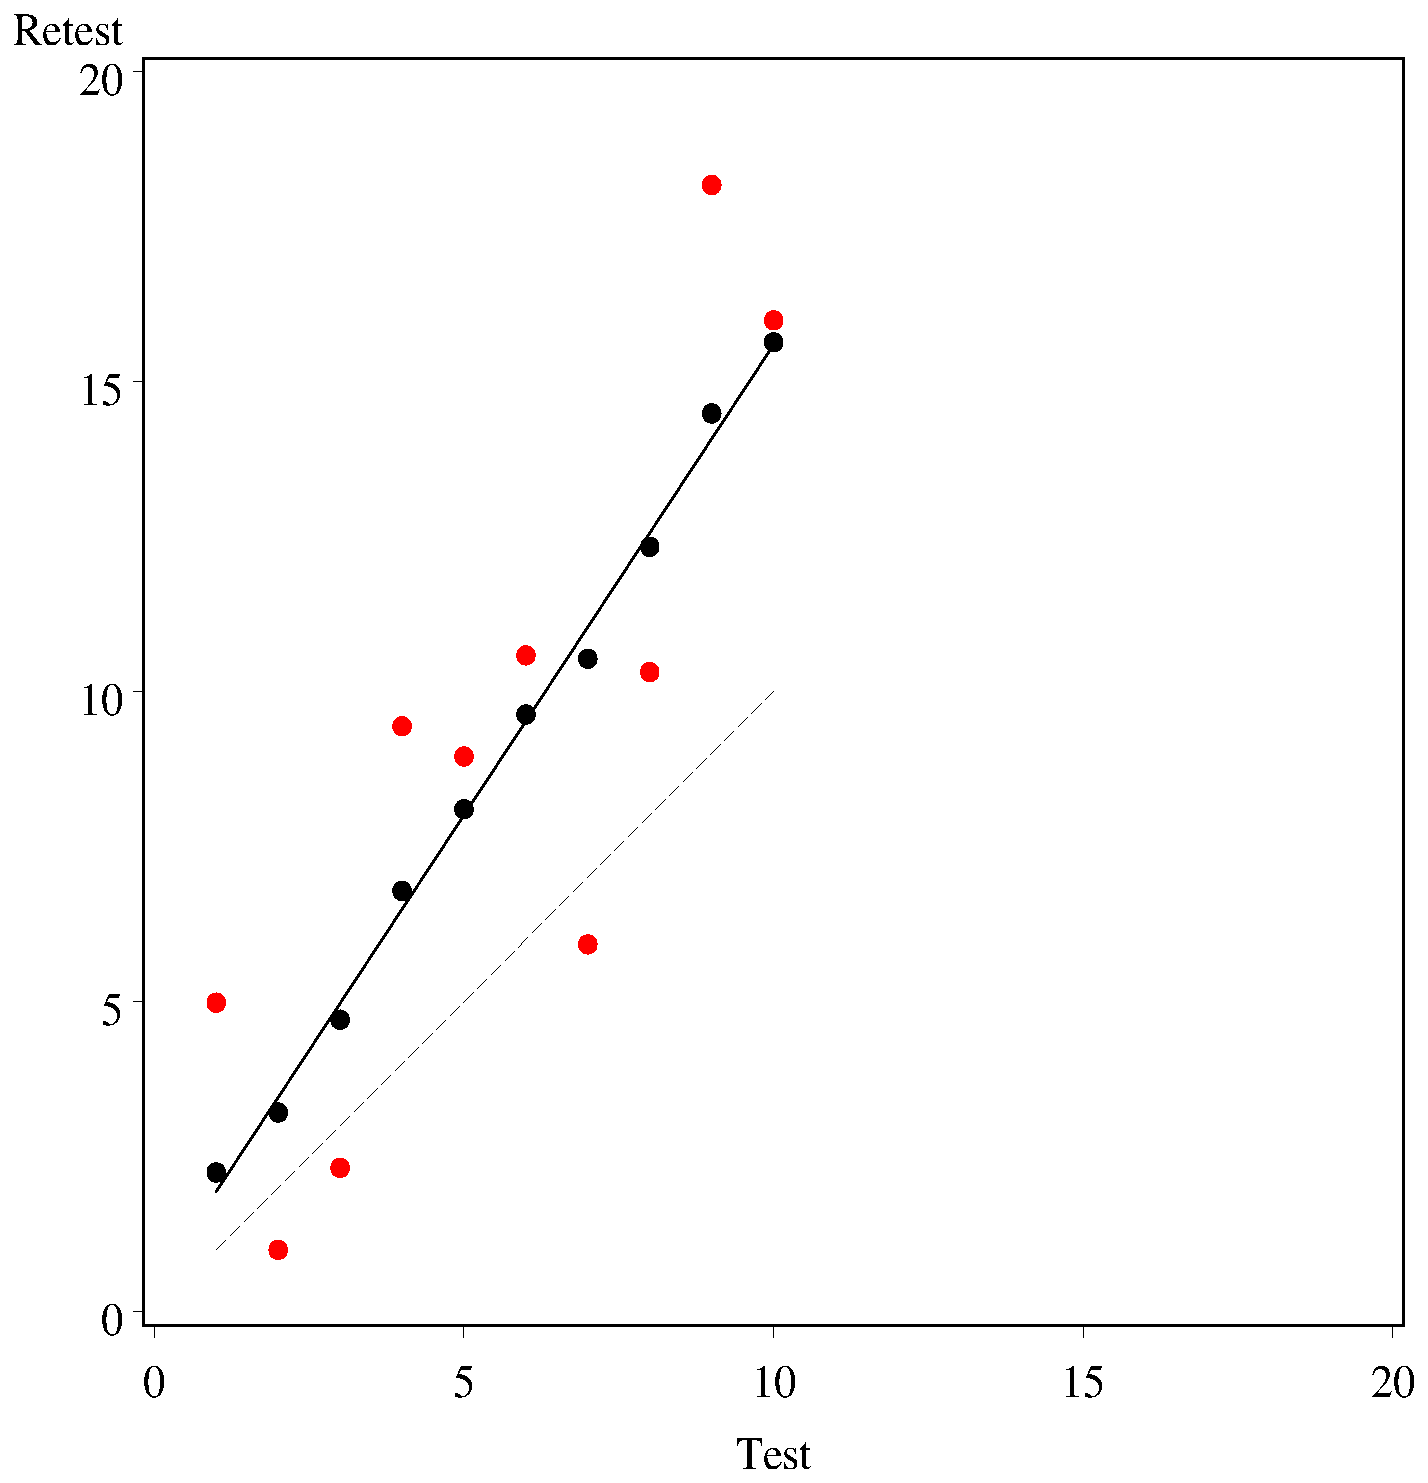 Hypothetical Data Demonstrating Good Relative Reliability Despite Poor Absolute Reliability. The figure depicts two fictional data sets (black and red circles), which both exhibit a similar linear association. The line of best fit is the solid line in the graph and is the same for both data sets, but the black circles sit much closer to the line than the red circles, leading to a much higher coefficient of stability (\(r = .99\) and \(.84\), respectively). However, neither sets of circles are on the line of complete agreement represented by the dashed line in the graph. If the circles fall on the line of complete agreement, it indicates that the measure’s scores show consistency in absolute scores across time. Thus, although the measures show strong relative reliability, they show poor absolute reliability. (Figure reprinted from Vaz et al. (2013), Figure 1, p. 3. Vaz, S., Falkmer, T., Passmore, A. E., Parsons, R., & Andreou, P. (2013). The case for using the repeatability coefficient when calculating test–retest reliability. PLoS ONE, 8(9), e73990. https://doi.org/10.1371/journal.pone.0073990)